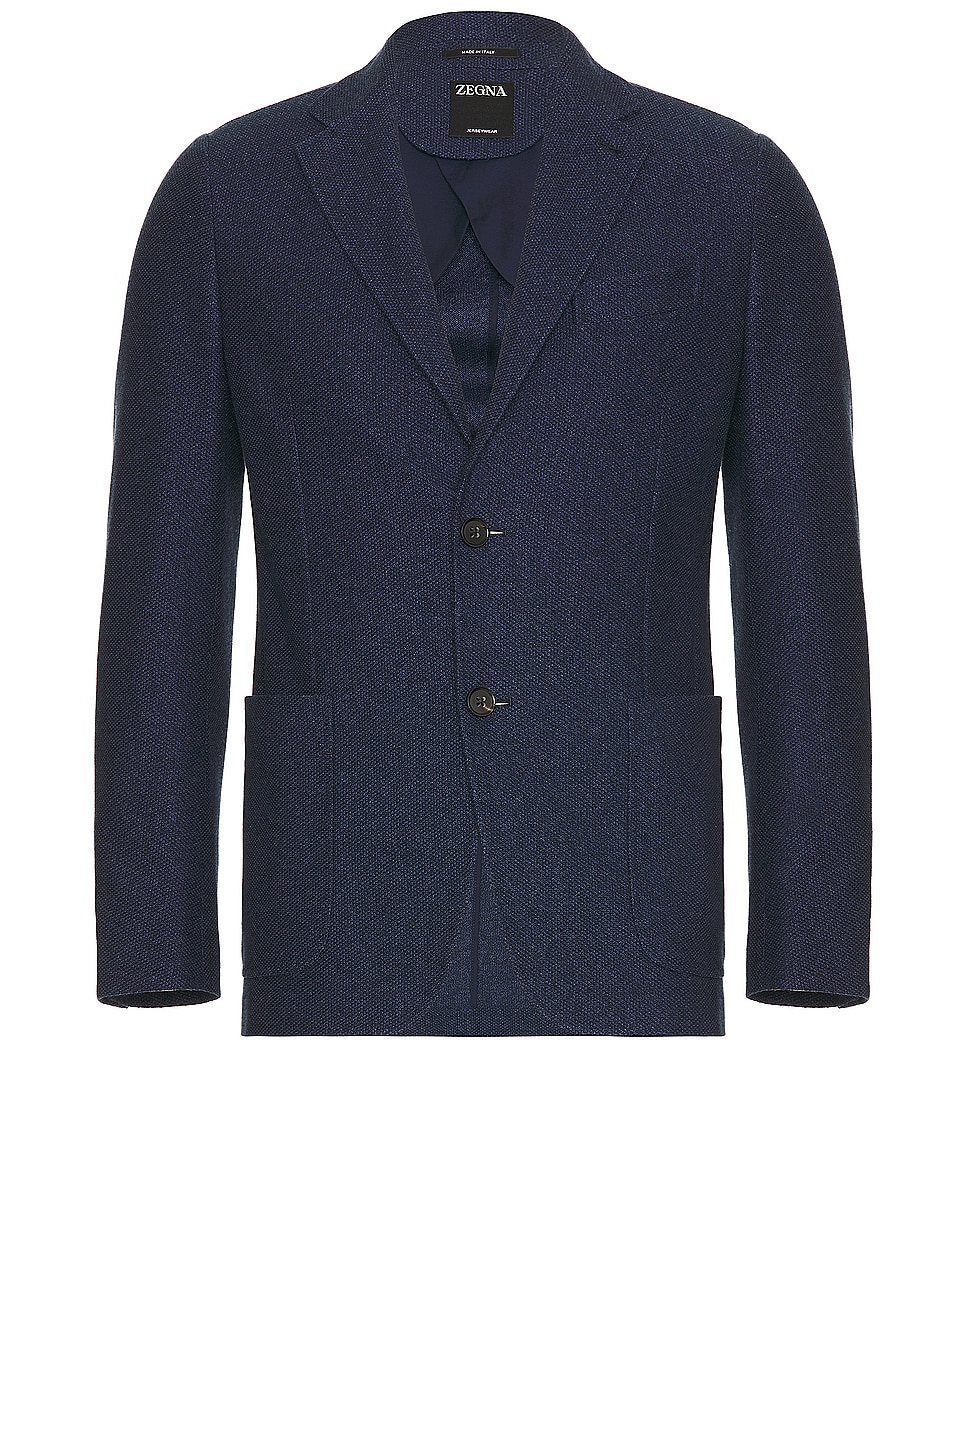 Image 1 of Zegna Cotton Shirt Jacket in Navy